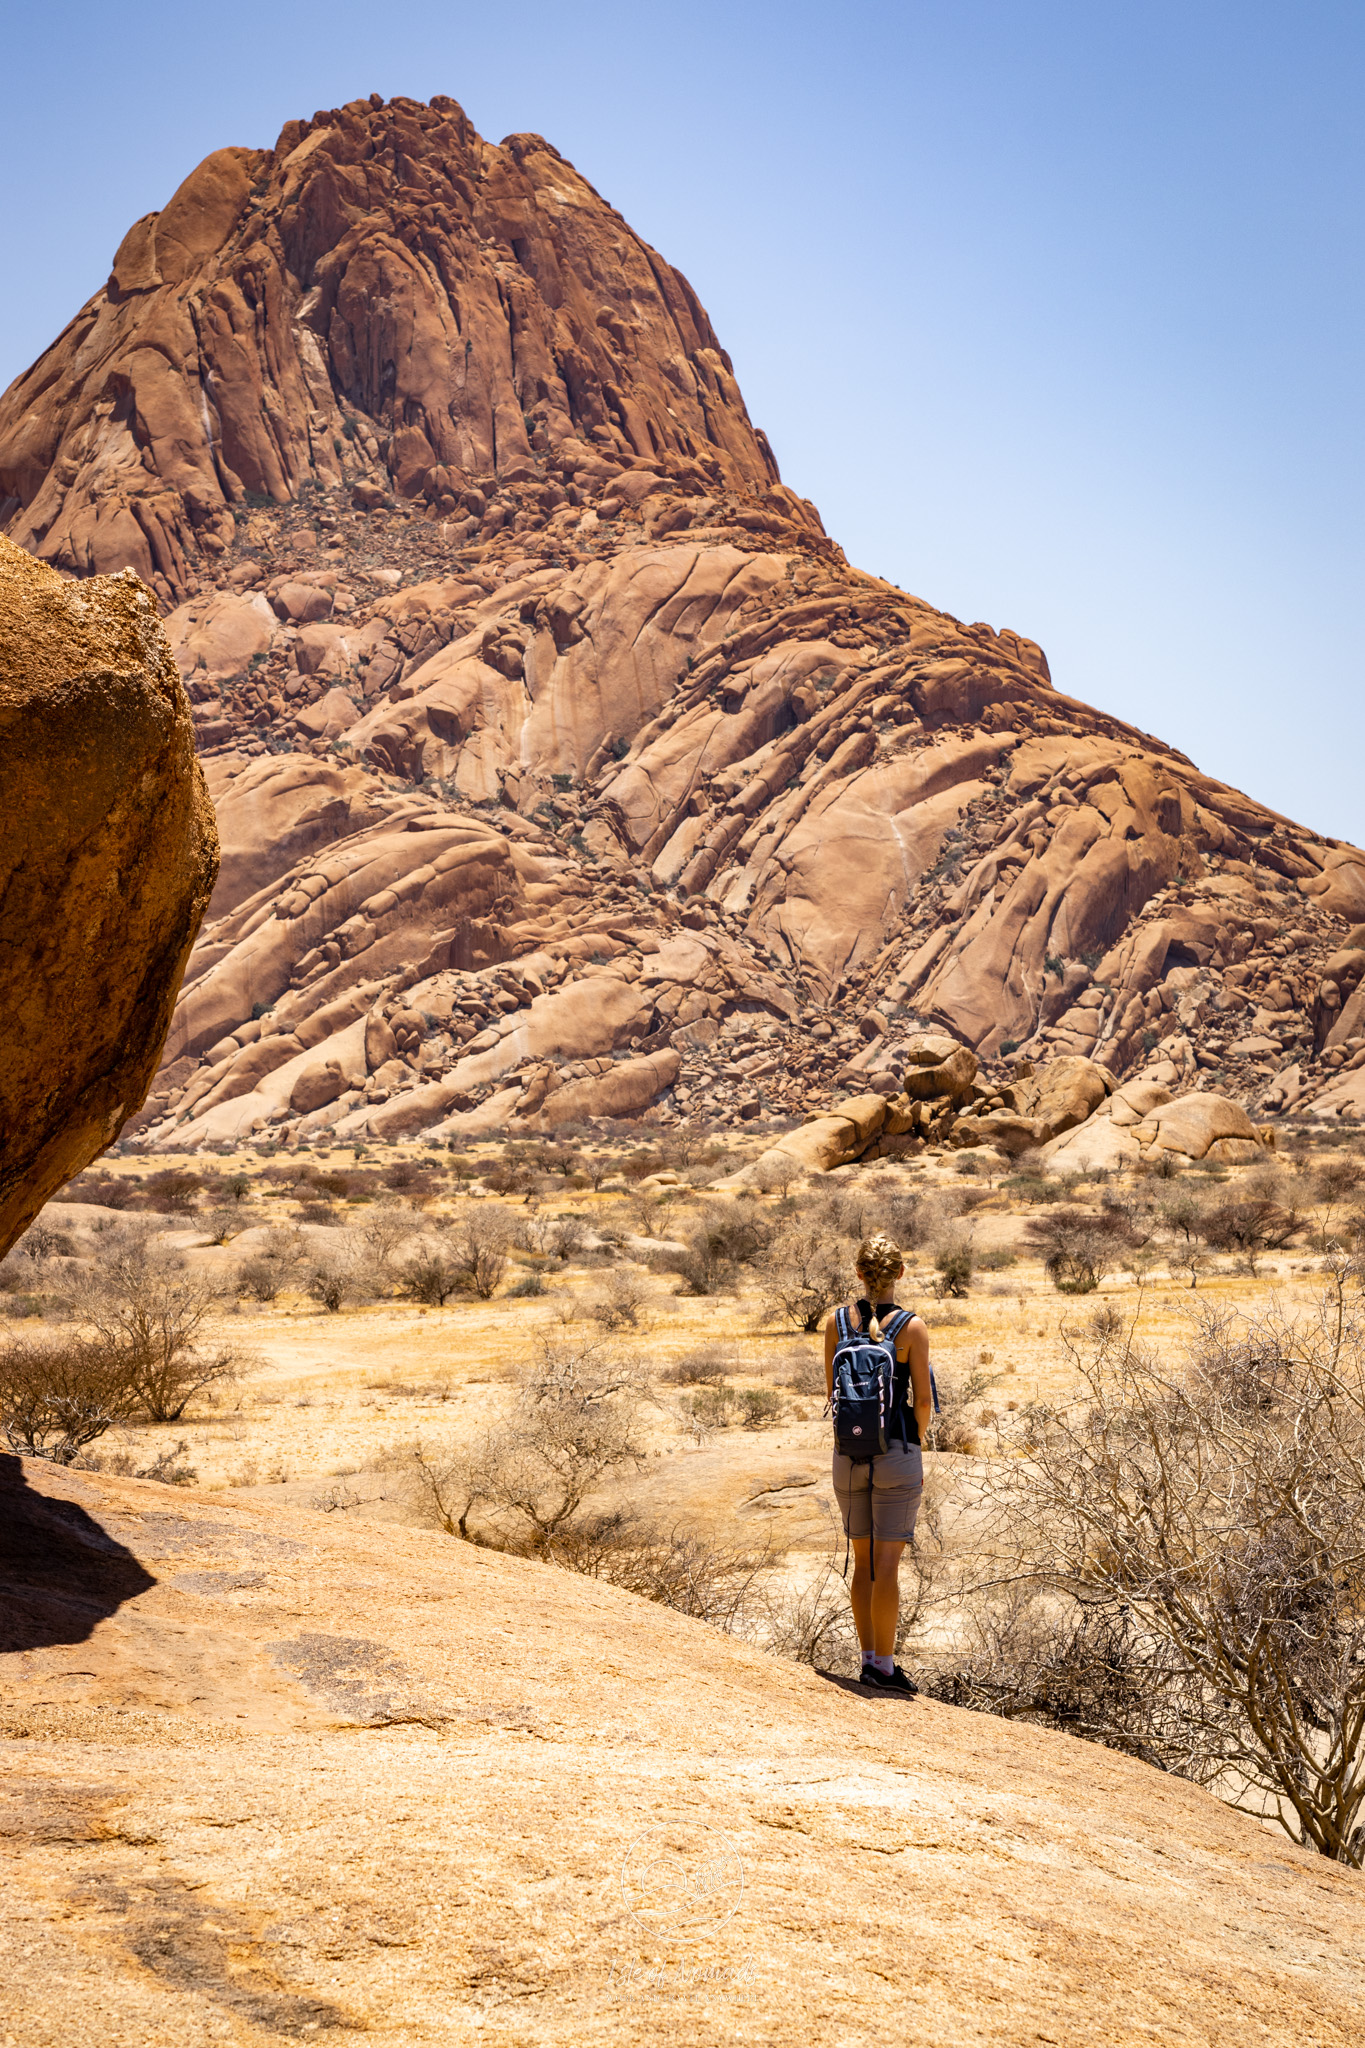 If you want to go hiking for real in Spitzkoppe, you need to arrive early...